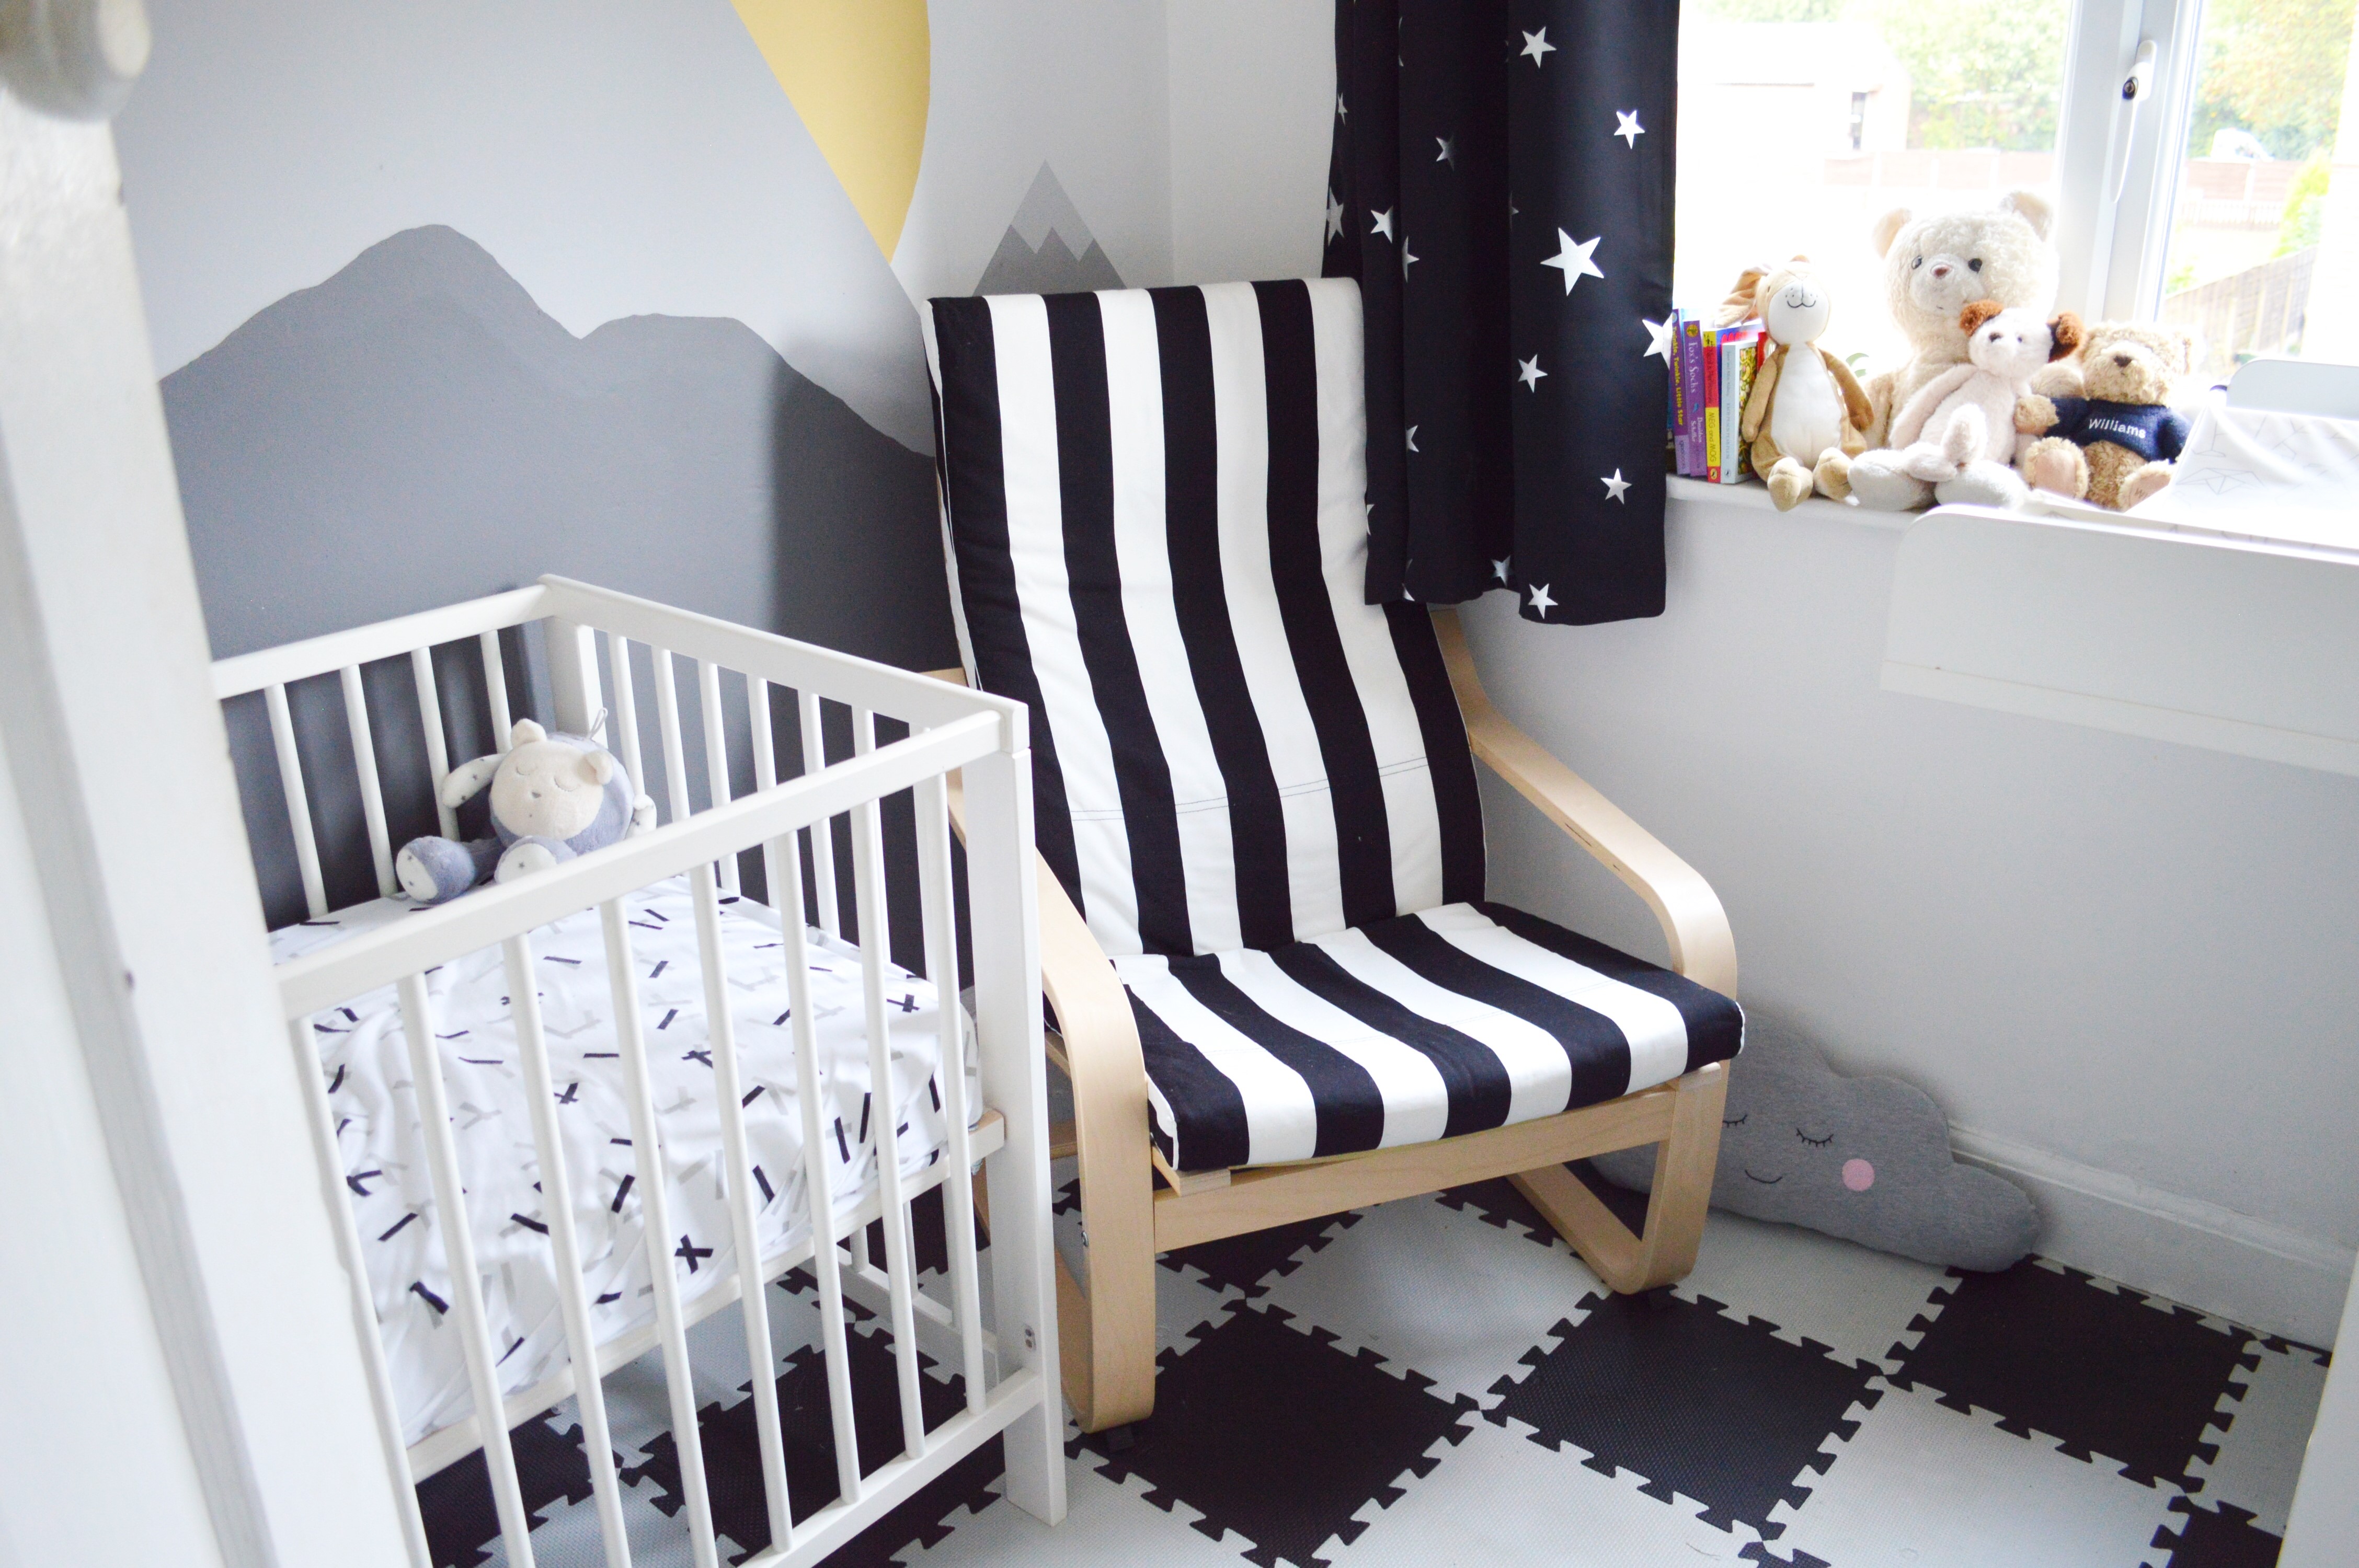 Ikea Poang Chair Review - Our New 